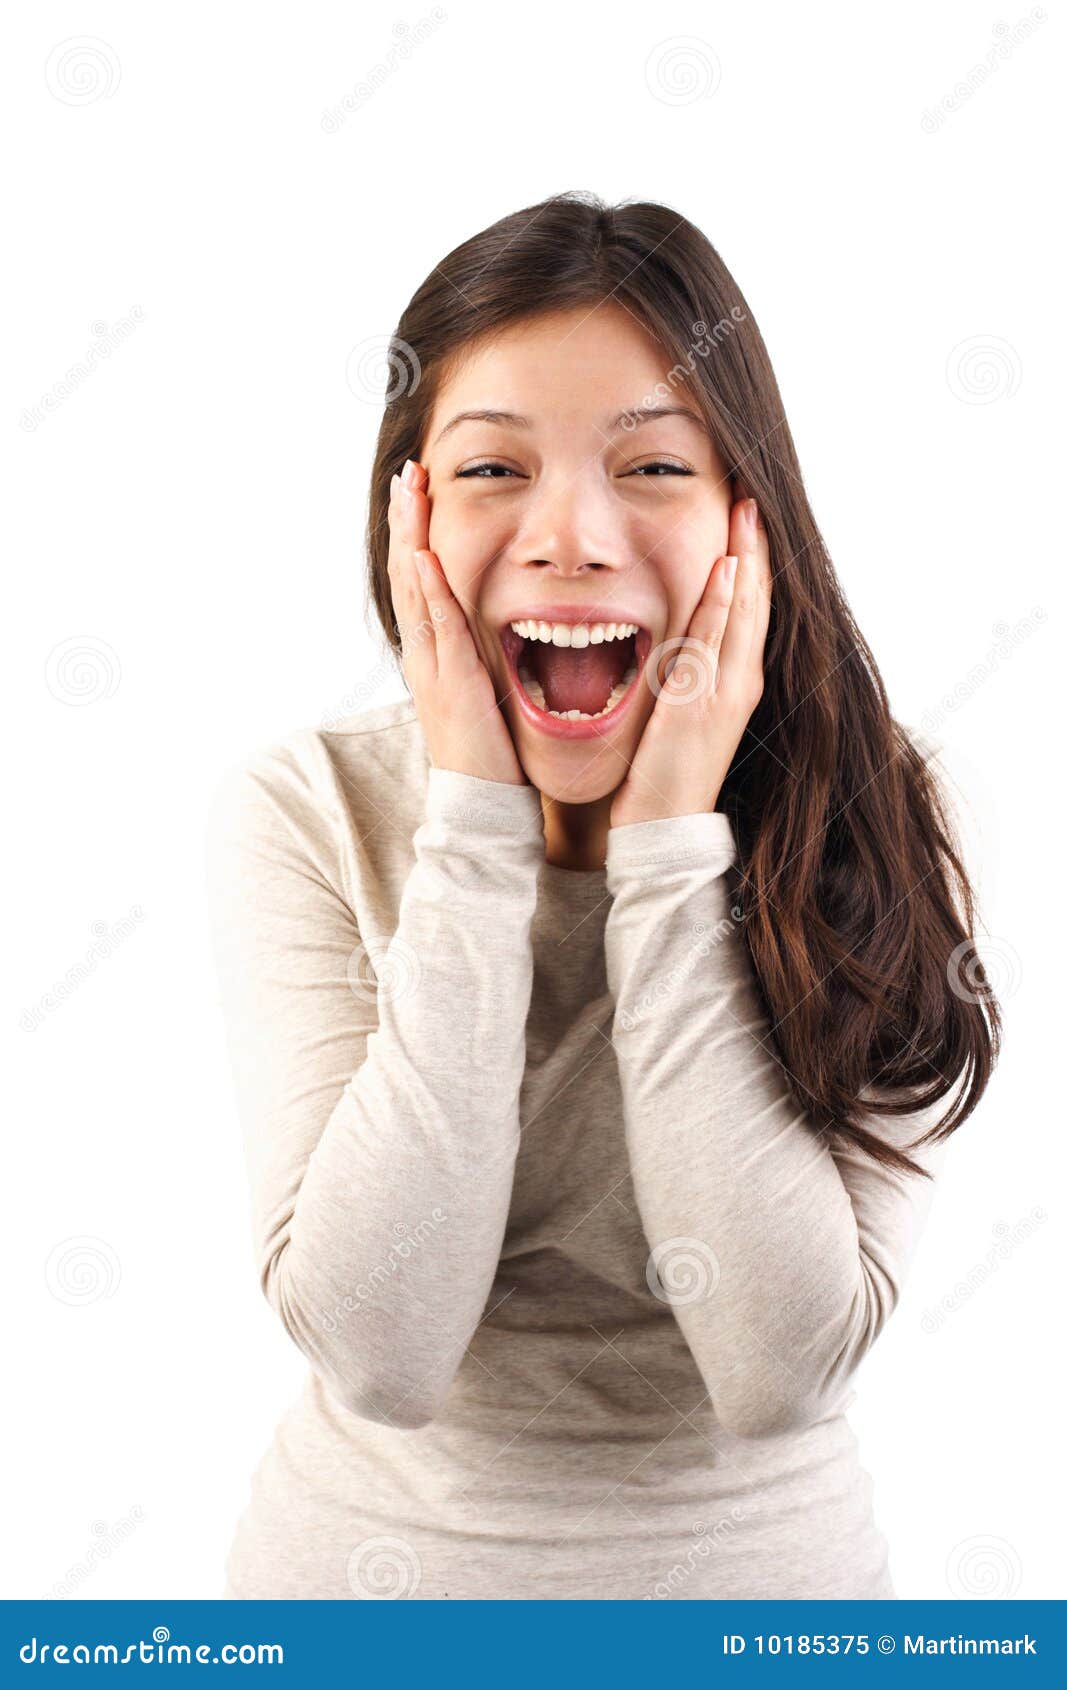 Surprised woman stock image. Image of happiness, background - 10185375